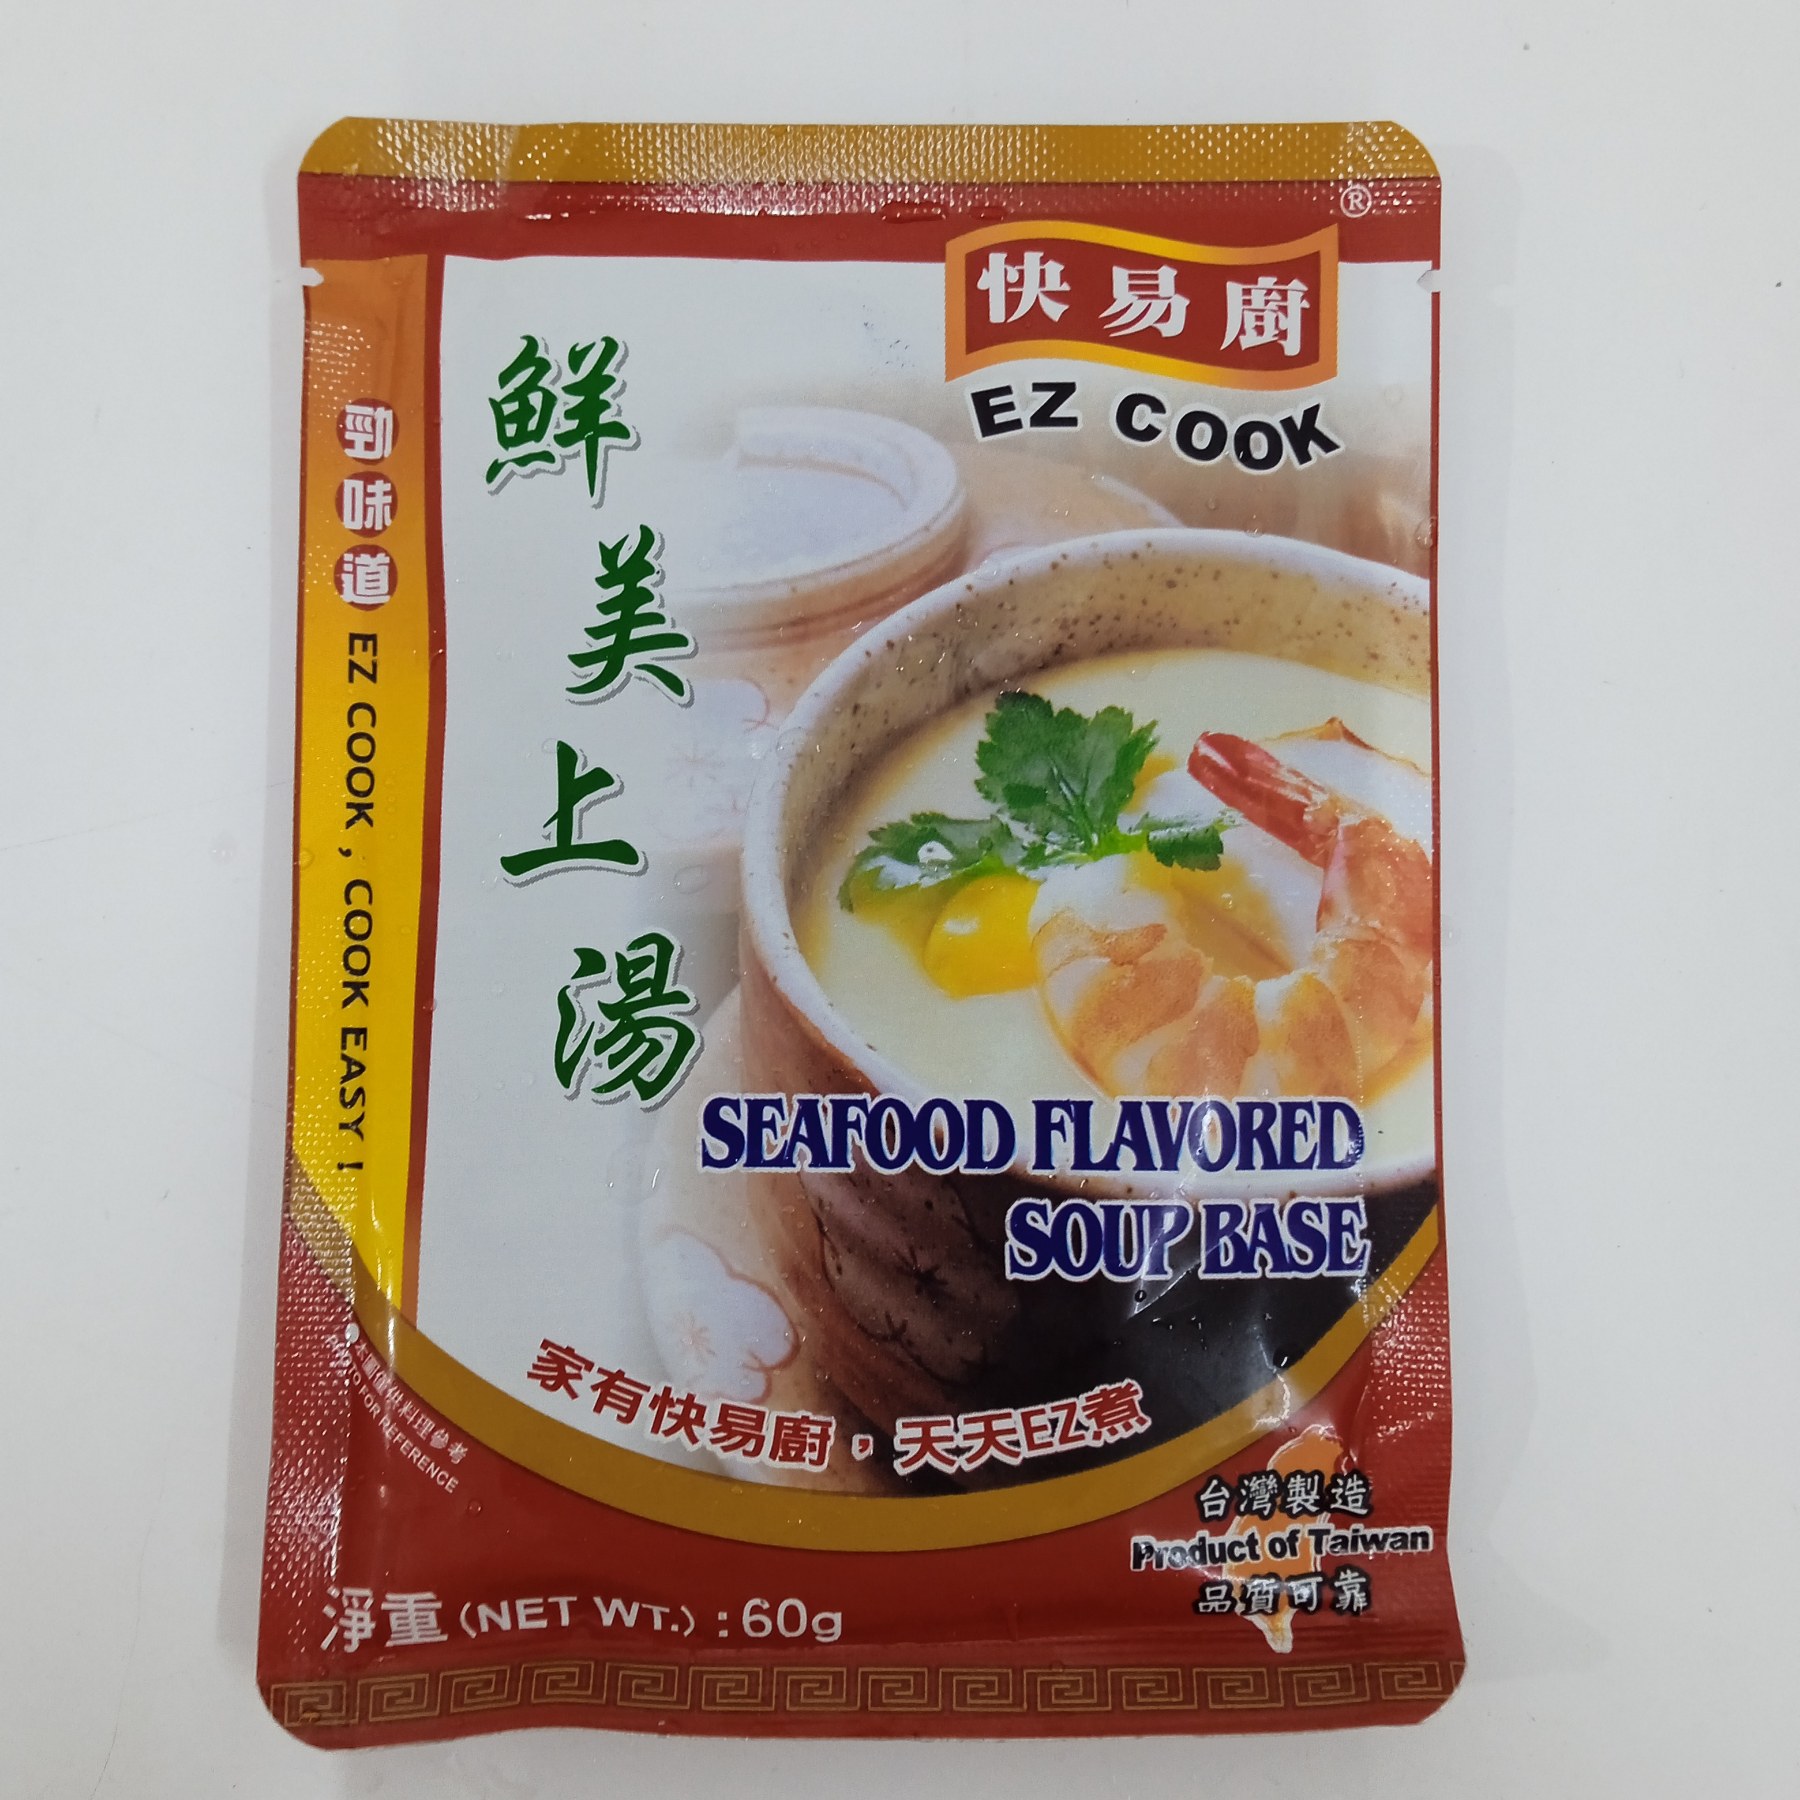 Seafood Flavored Soup Base